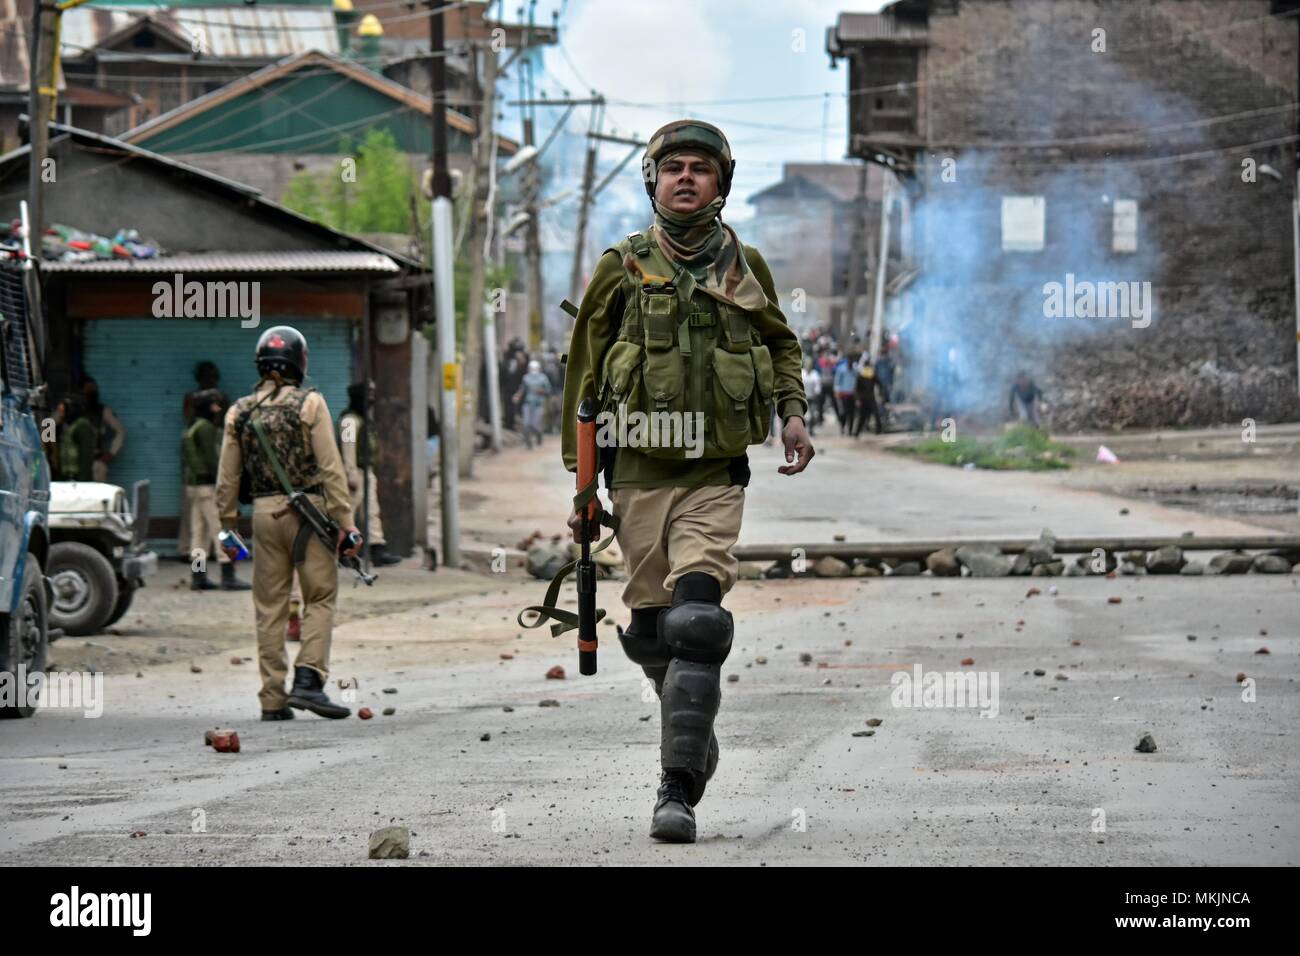 May 8, 2018 - Srinagar, J&K, India - An Indian paramilitary trooper can be seen in action during clashes in Srinagar, Indian administered Kashmir. Fierce clashes broke out between government forces and Kashmiri protesters in Srinagar on Tuesday as the valley continued to remain tense over the killing of 11 people including 5 militants and 6 civilians in Indian administered Kashmir. Police used tear smoke shells and shot gun pellets to disperse hundreds of demonstrators who hurled rocks and chanted anti-Indian and pro-freedom slogans. Credit: Saqib Majeed/SOPA Images/ZUMA Wire/Alamy Live News Stock Photo